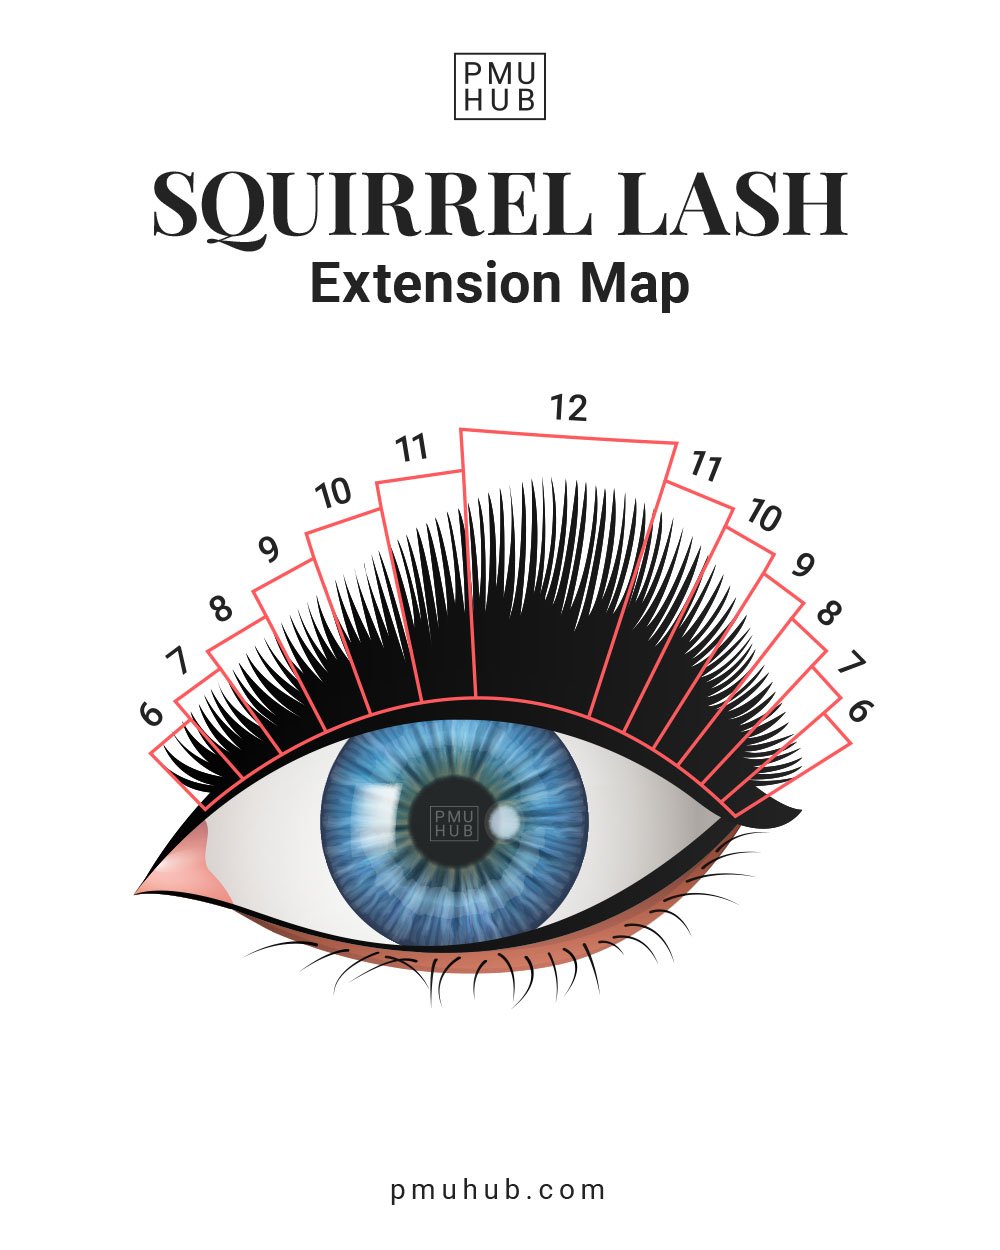 squirrel lash extension map - how are squirrel eyelash extensions done